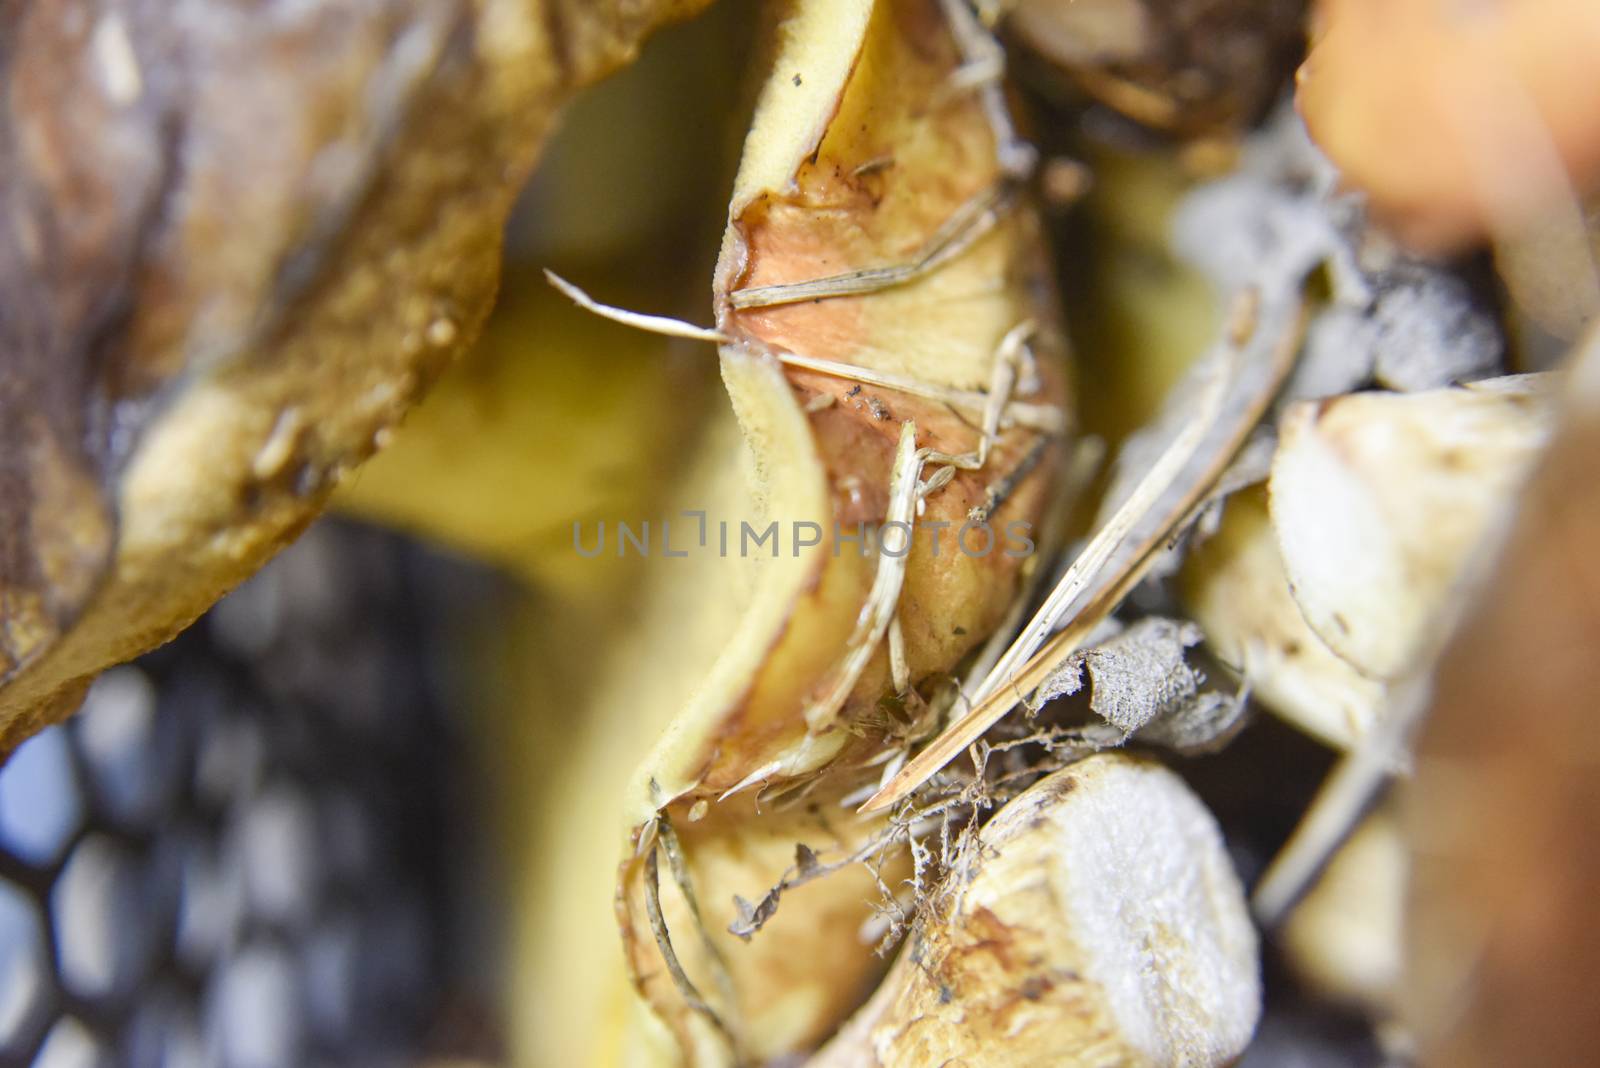 selective focus at the bottom side of the mushroom. Macro fotography, food concepts